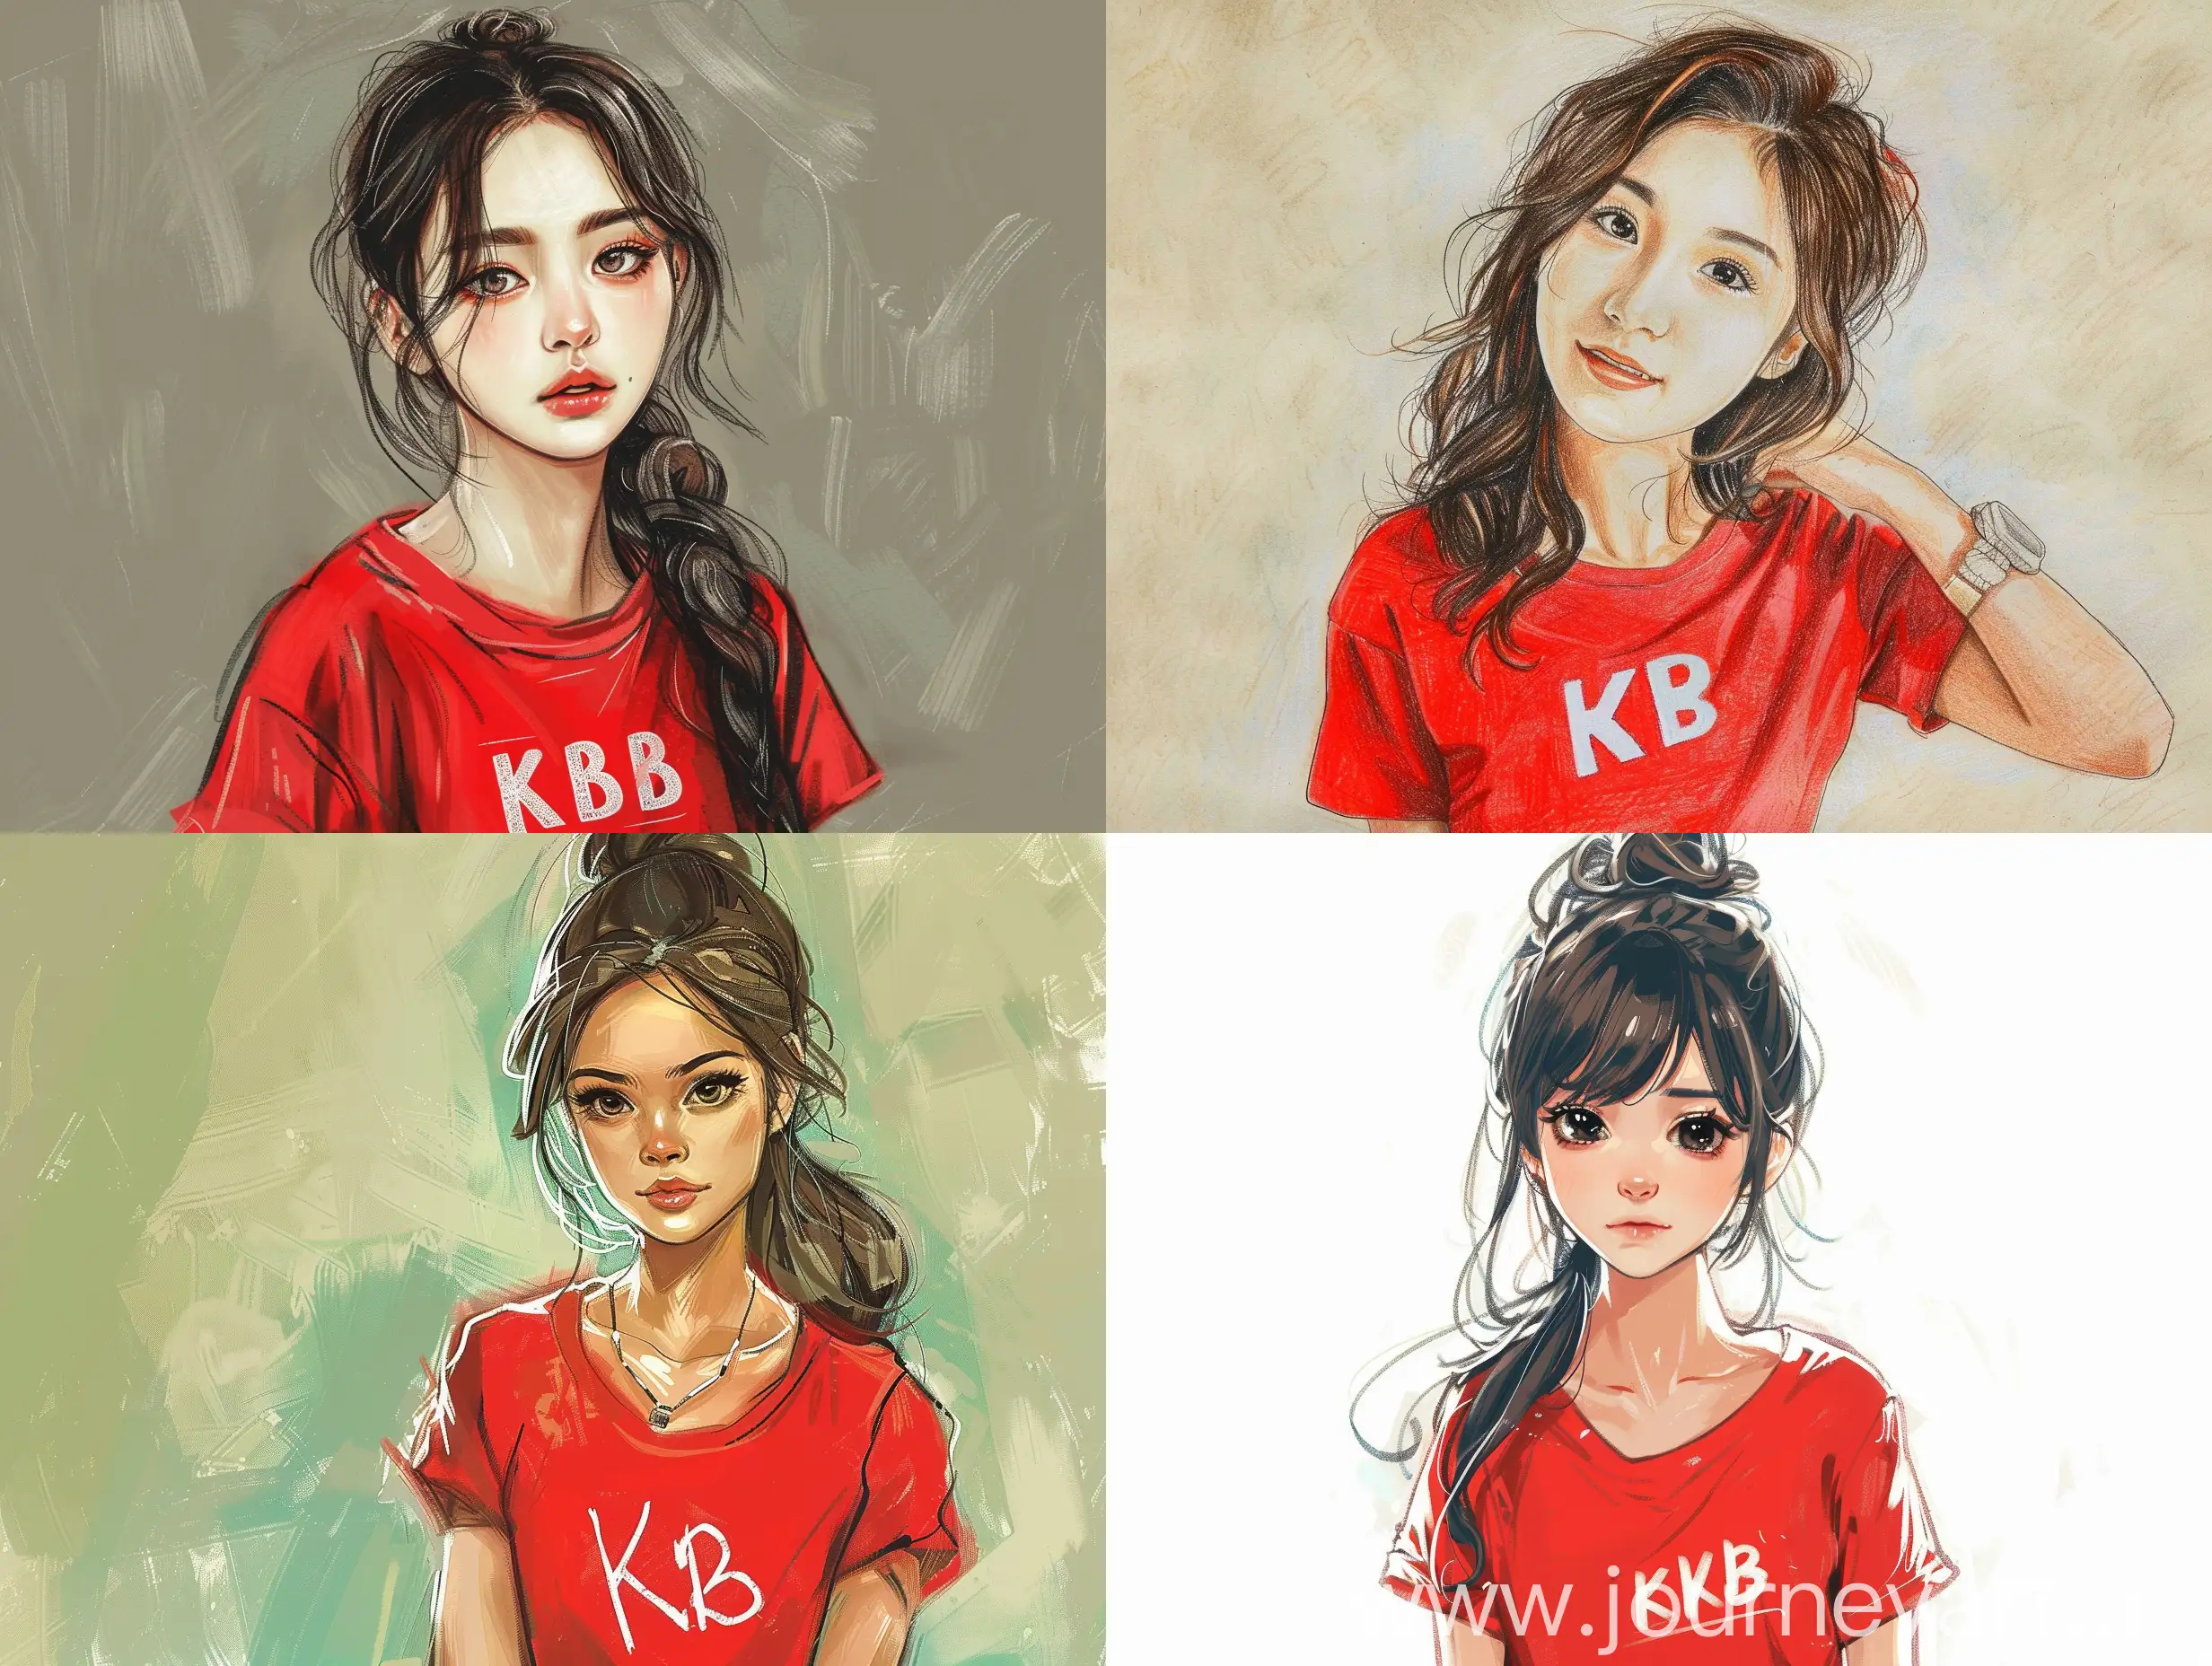 Stylish-Girl-in-Red-TShirt-with-Unique-Artistic-Design